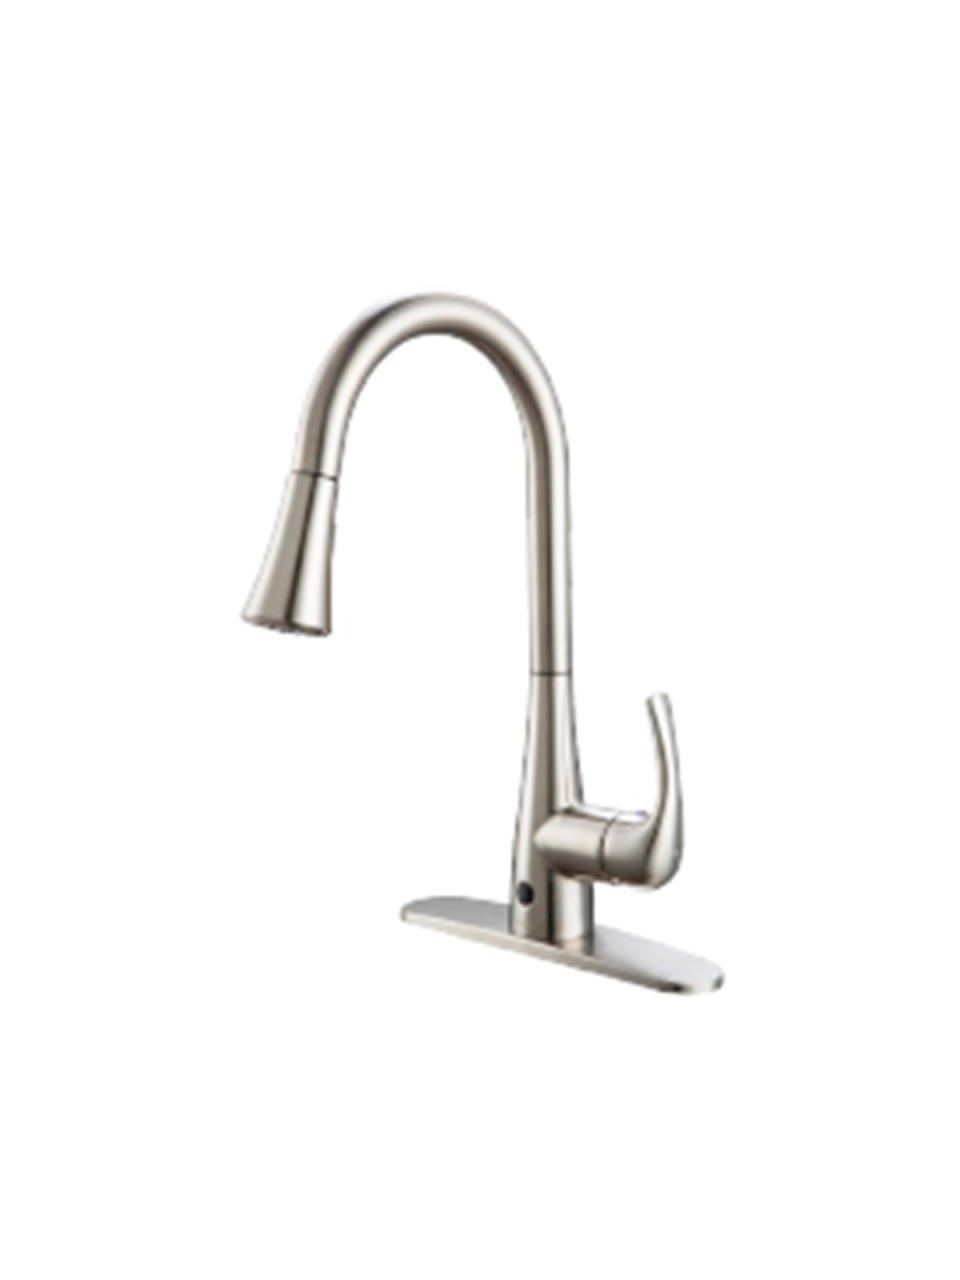 FORIOUS Touch Kitchen Faucet with Pull Down Sprayer, $130